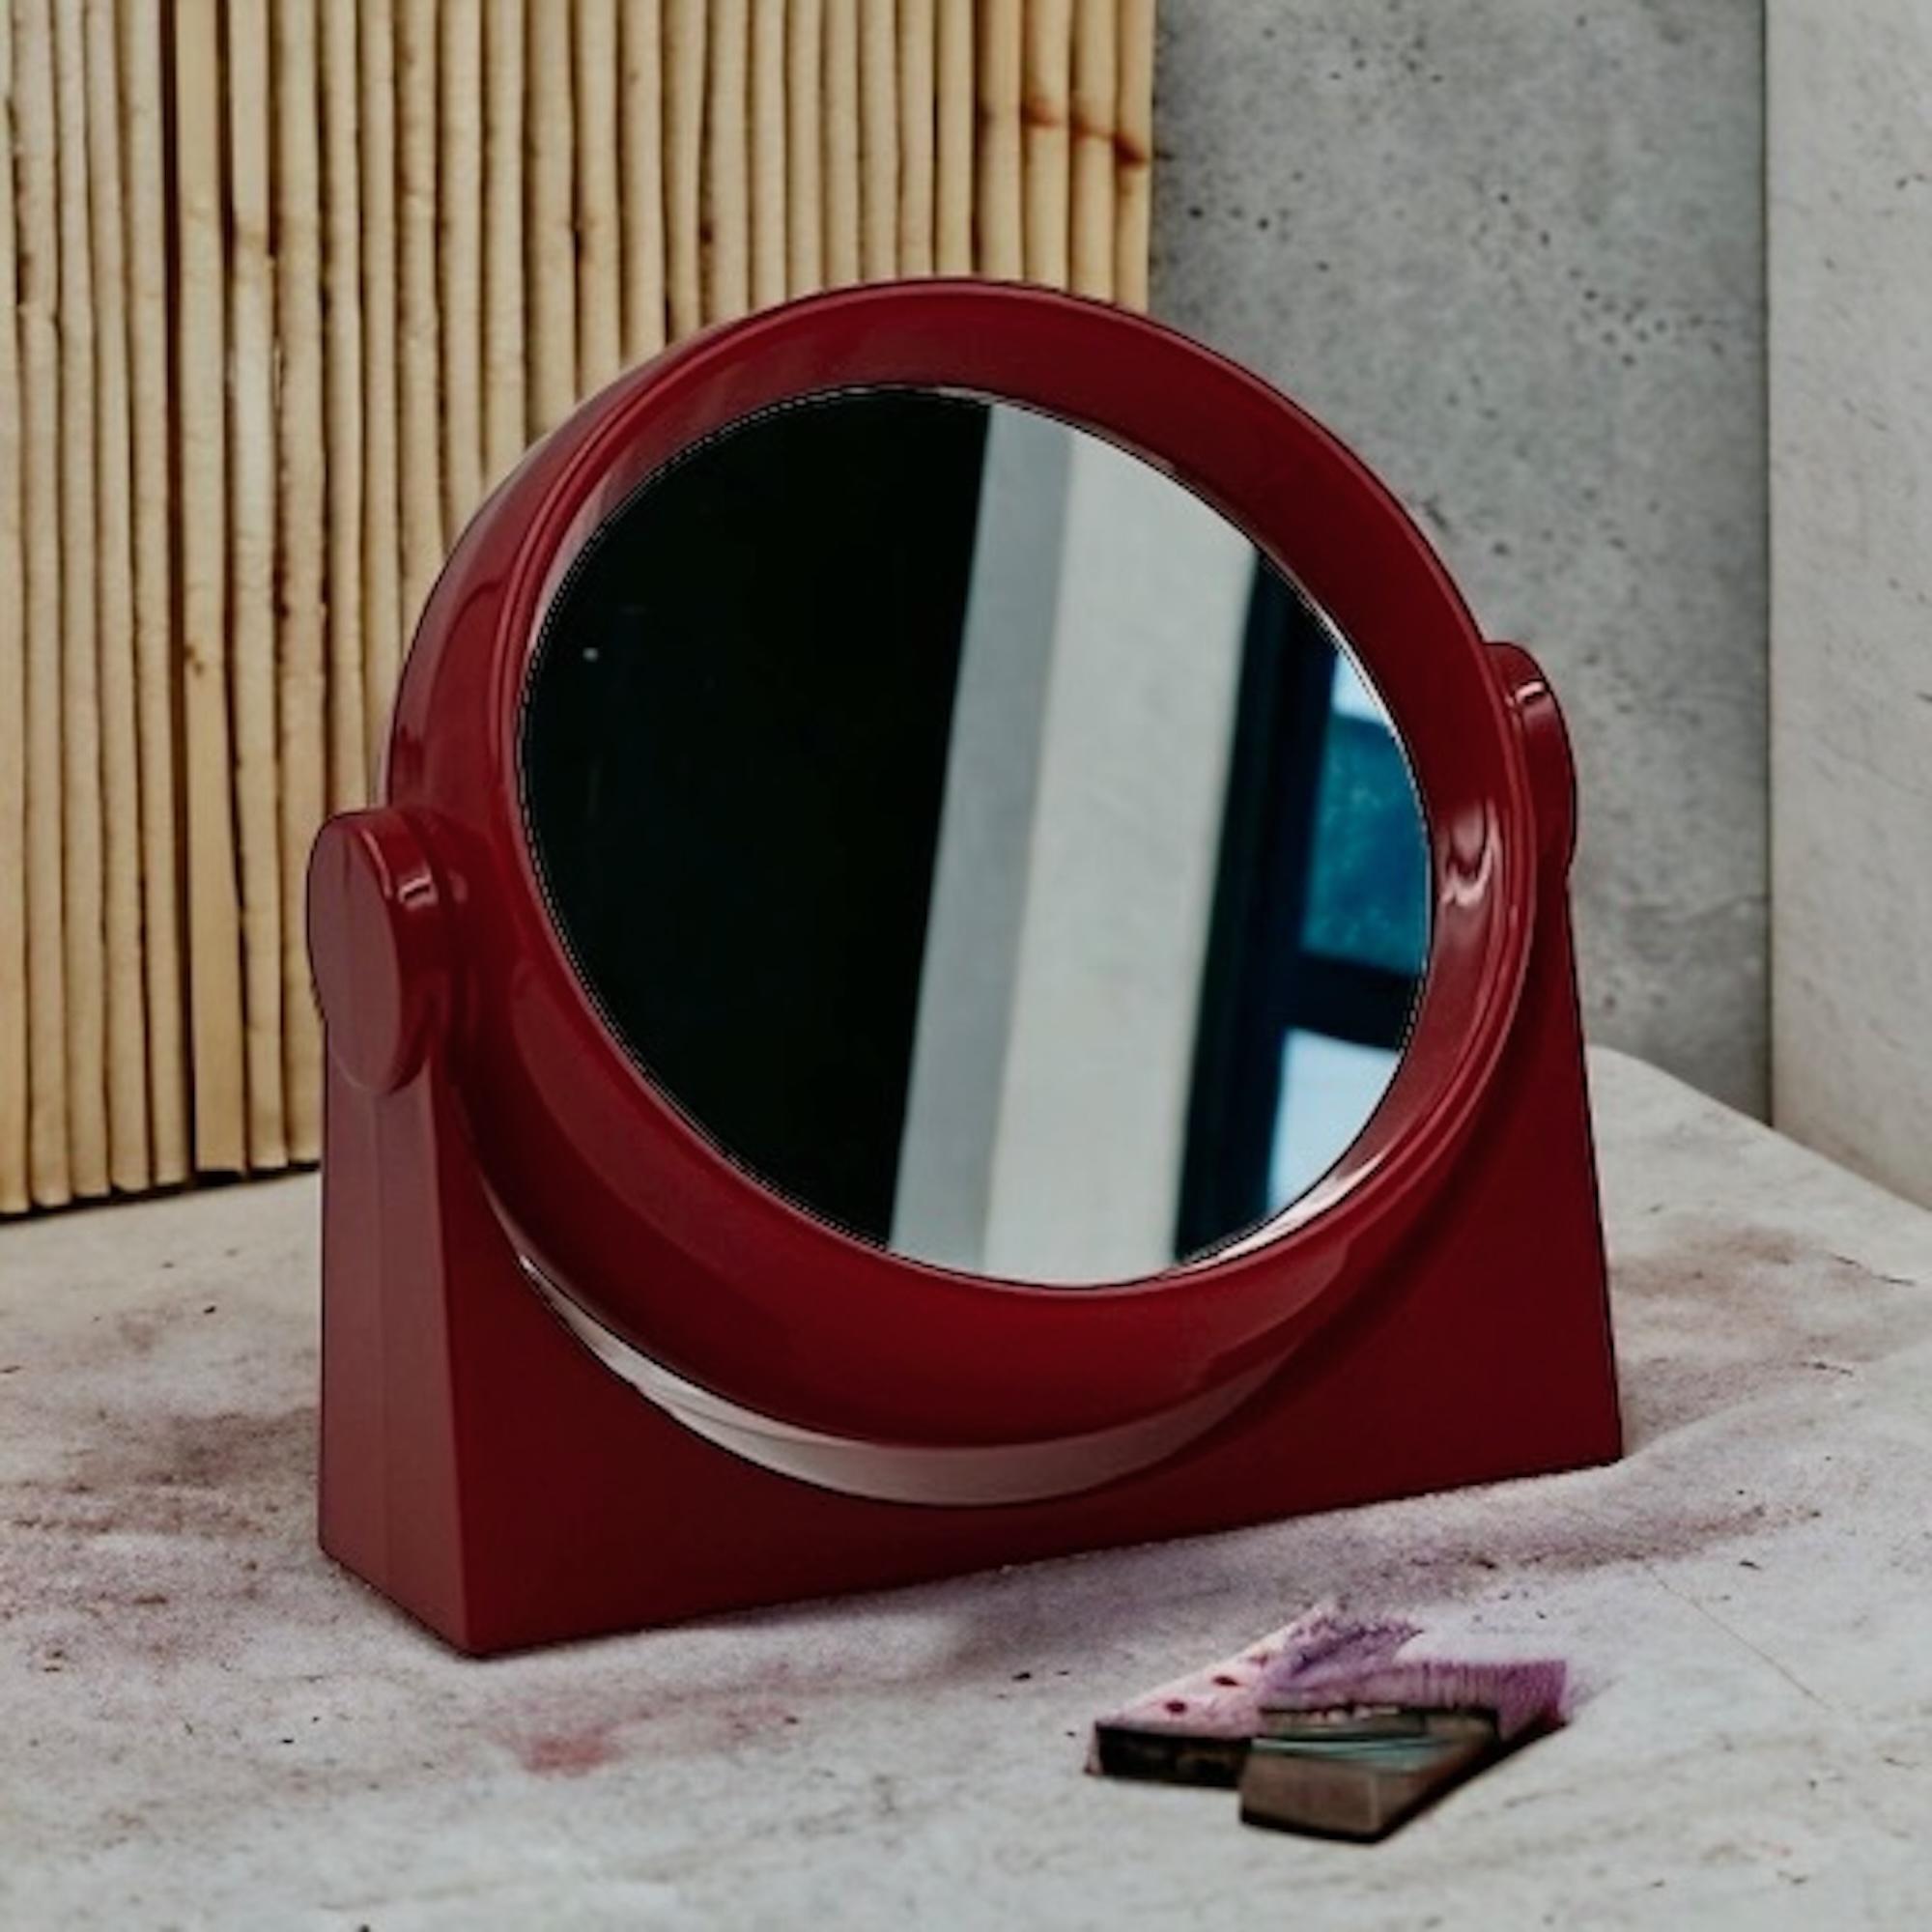 Space Age Red Table Mirror - Retro-Futuristic 1970s Design Made in Germany For Sale 4